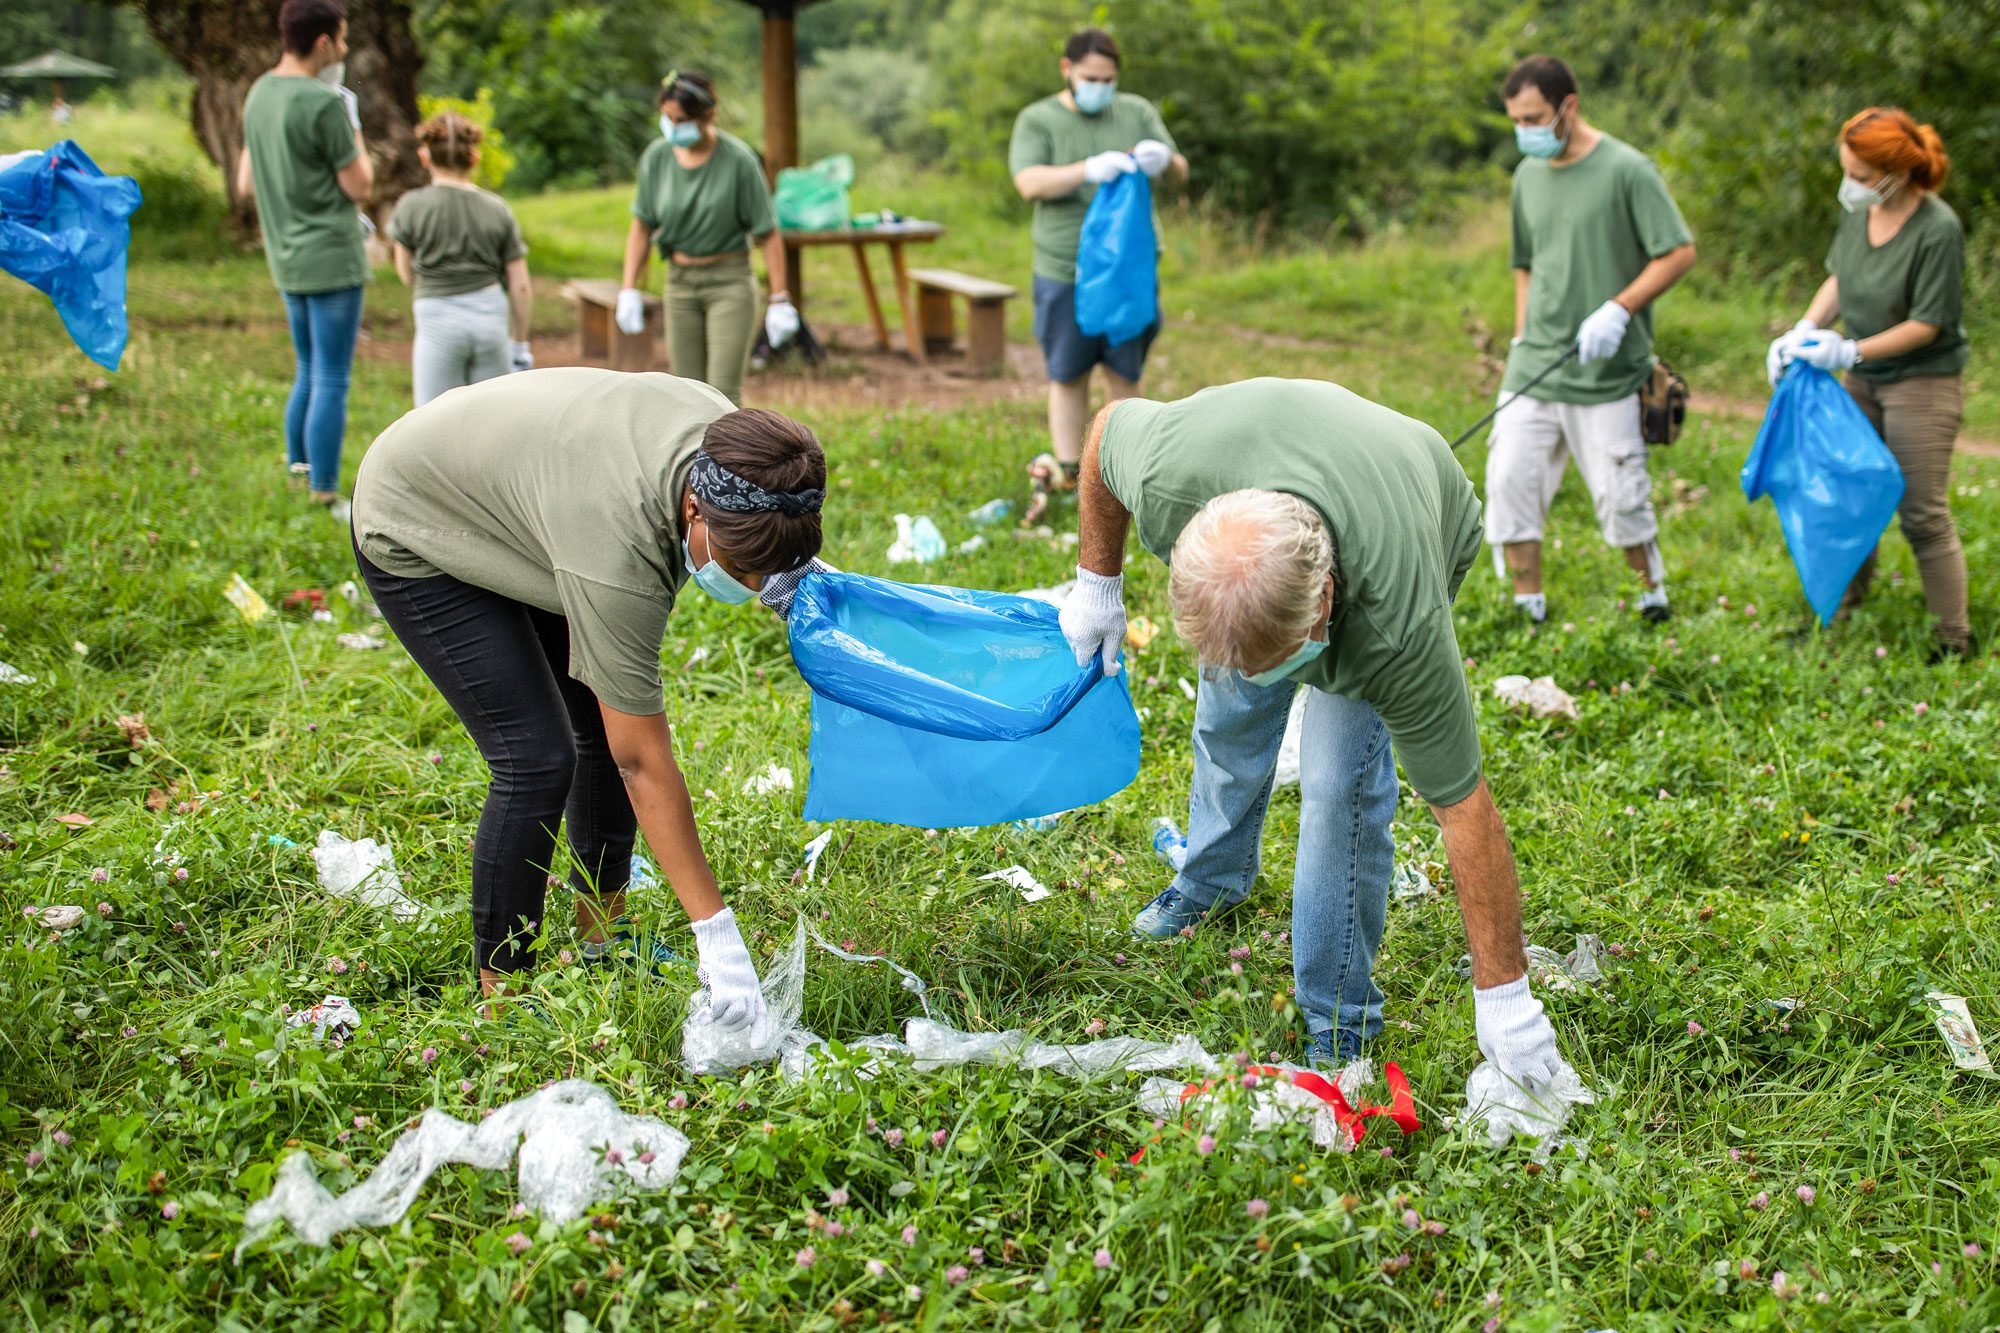 Multi Ethnic Group Of Volunteers Cleaning Public Park Wearing Protective Face Masks